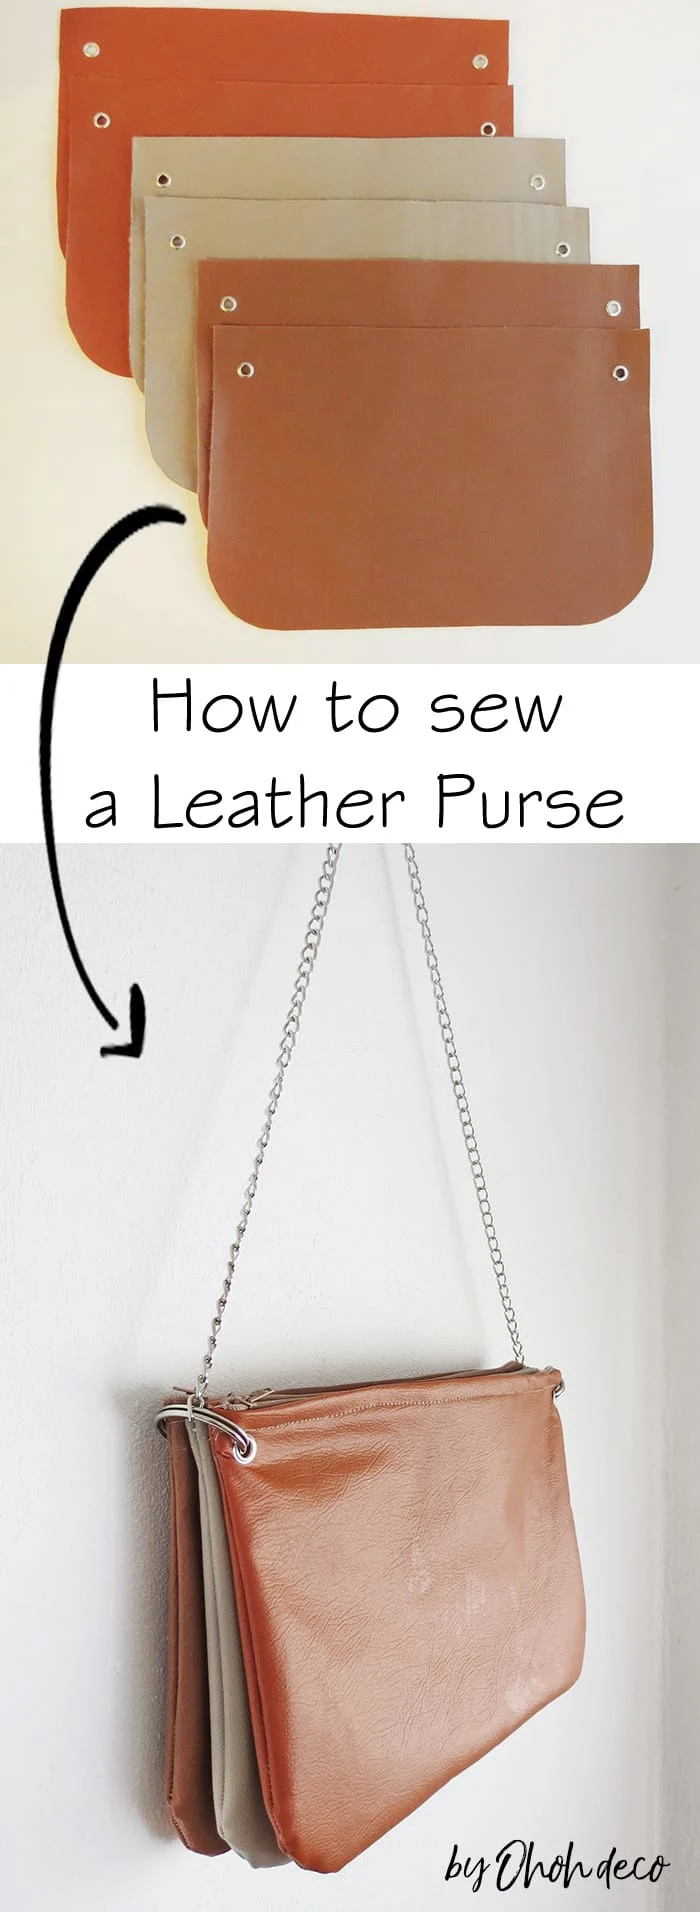 how to sew a leather purse